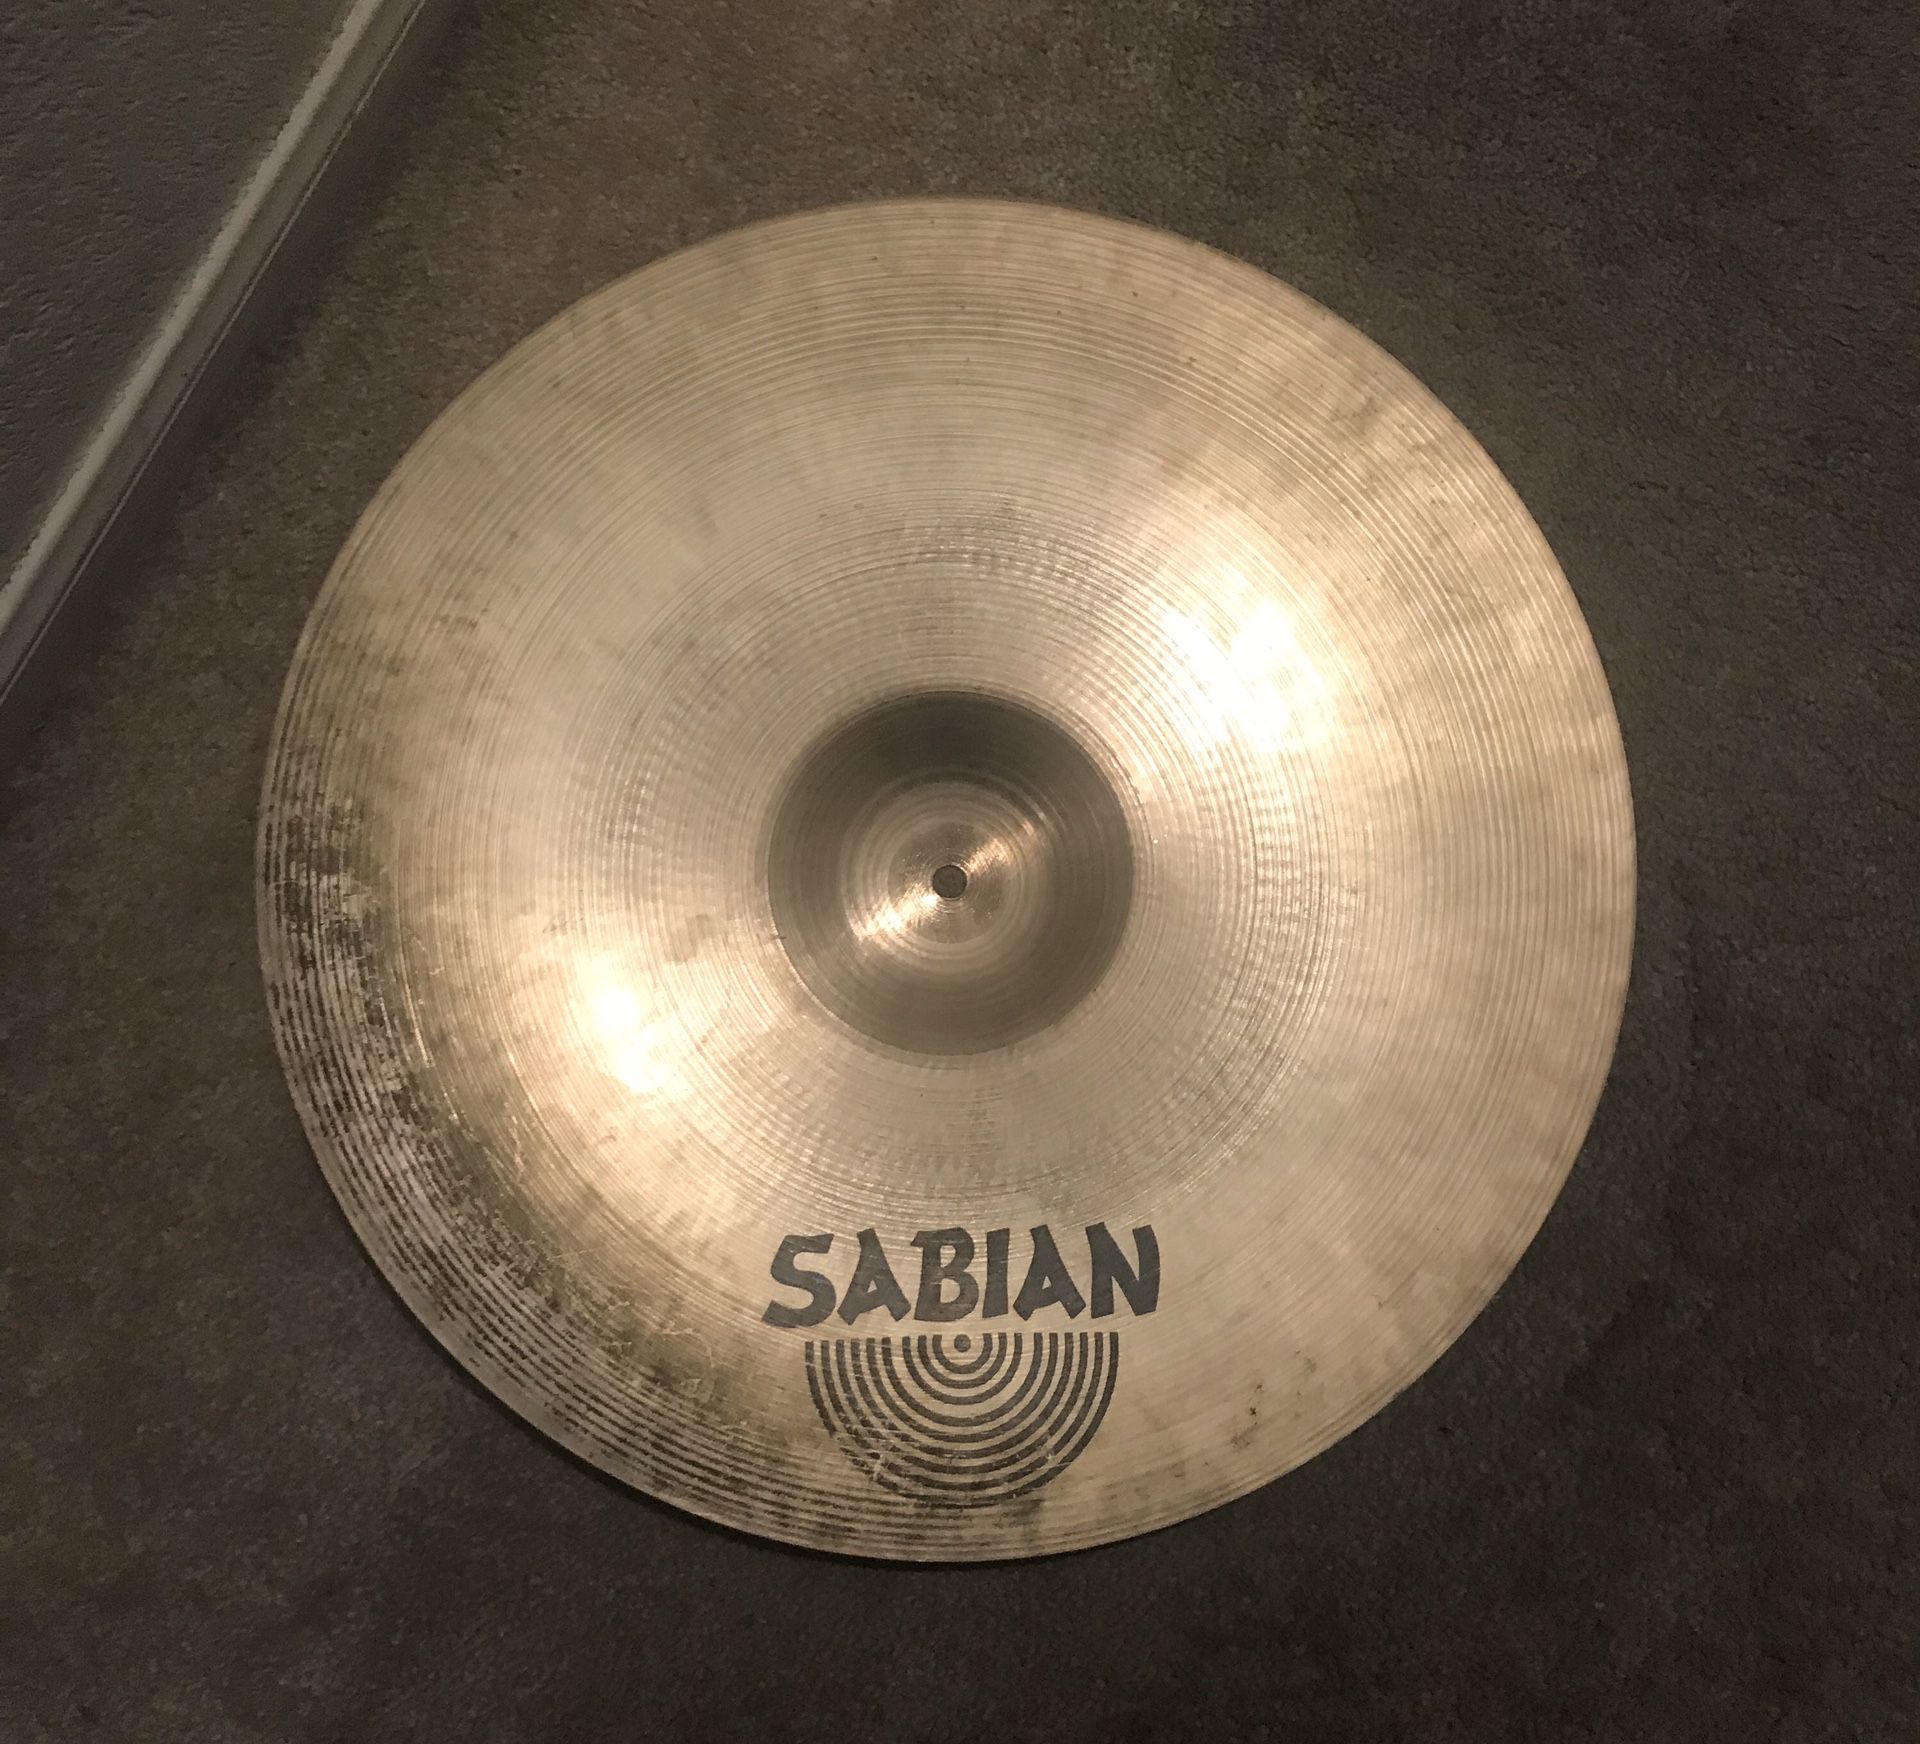 Sabian AA 20” ride cymbal for drum set